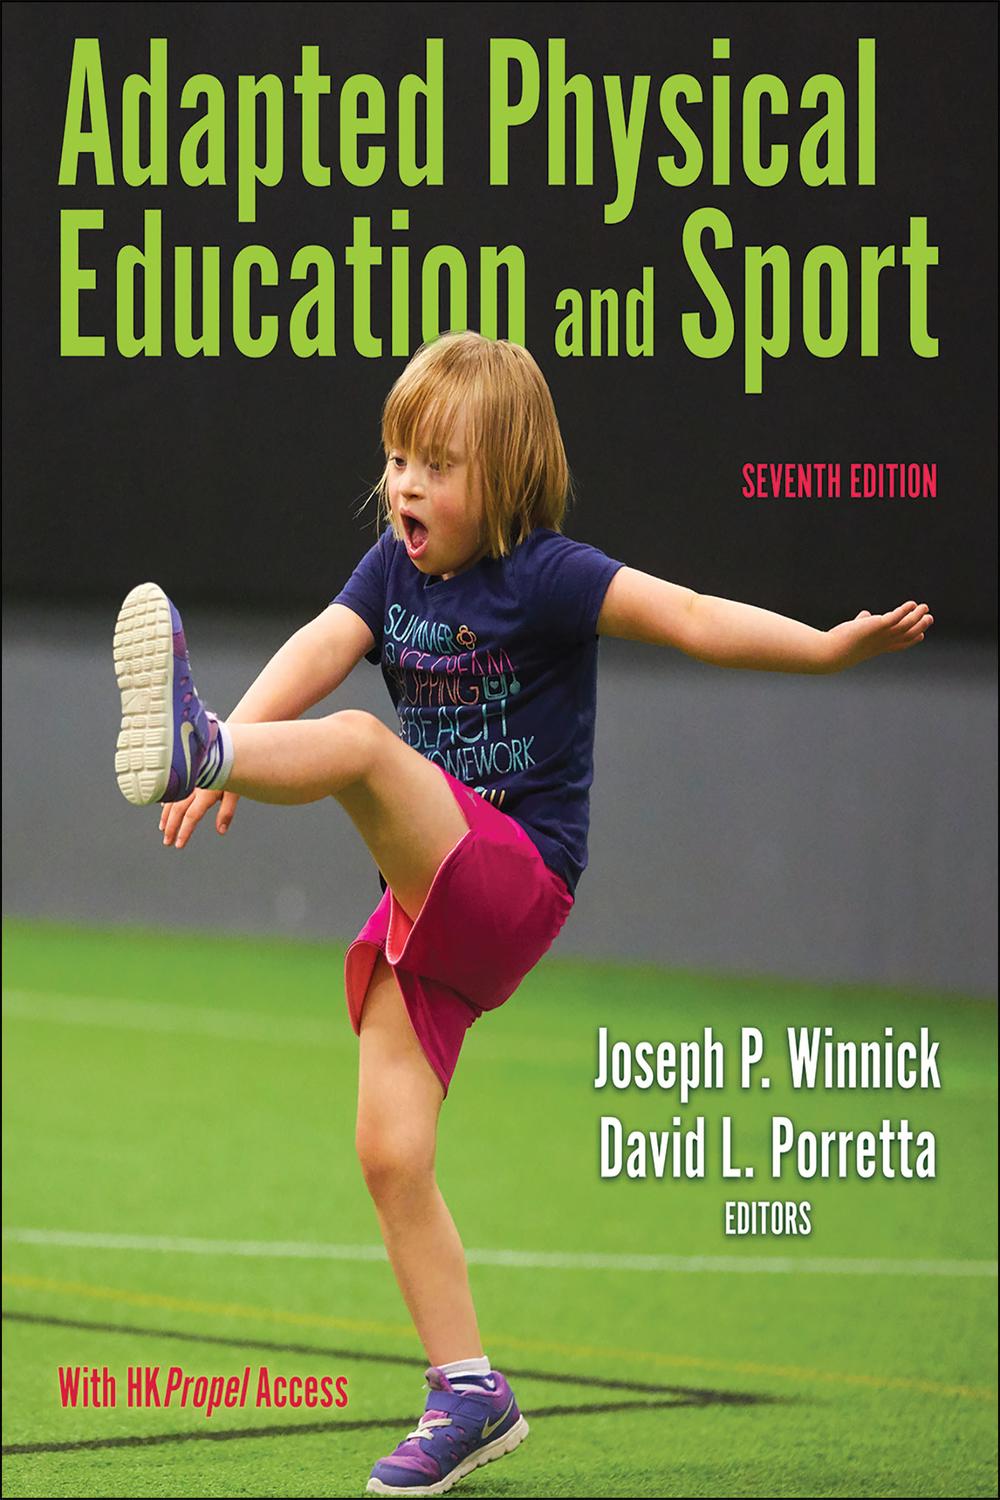 adapted physical education and sport 5th edition pdf download